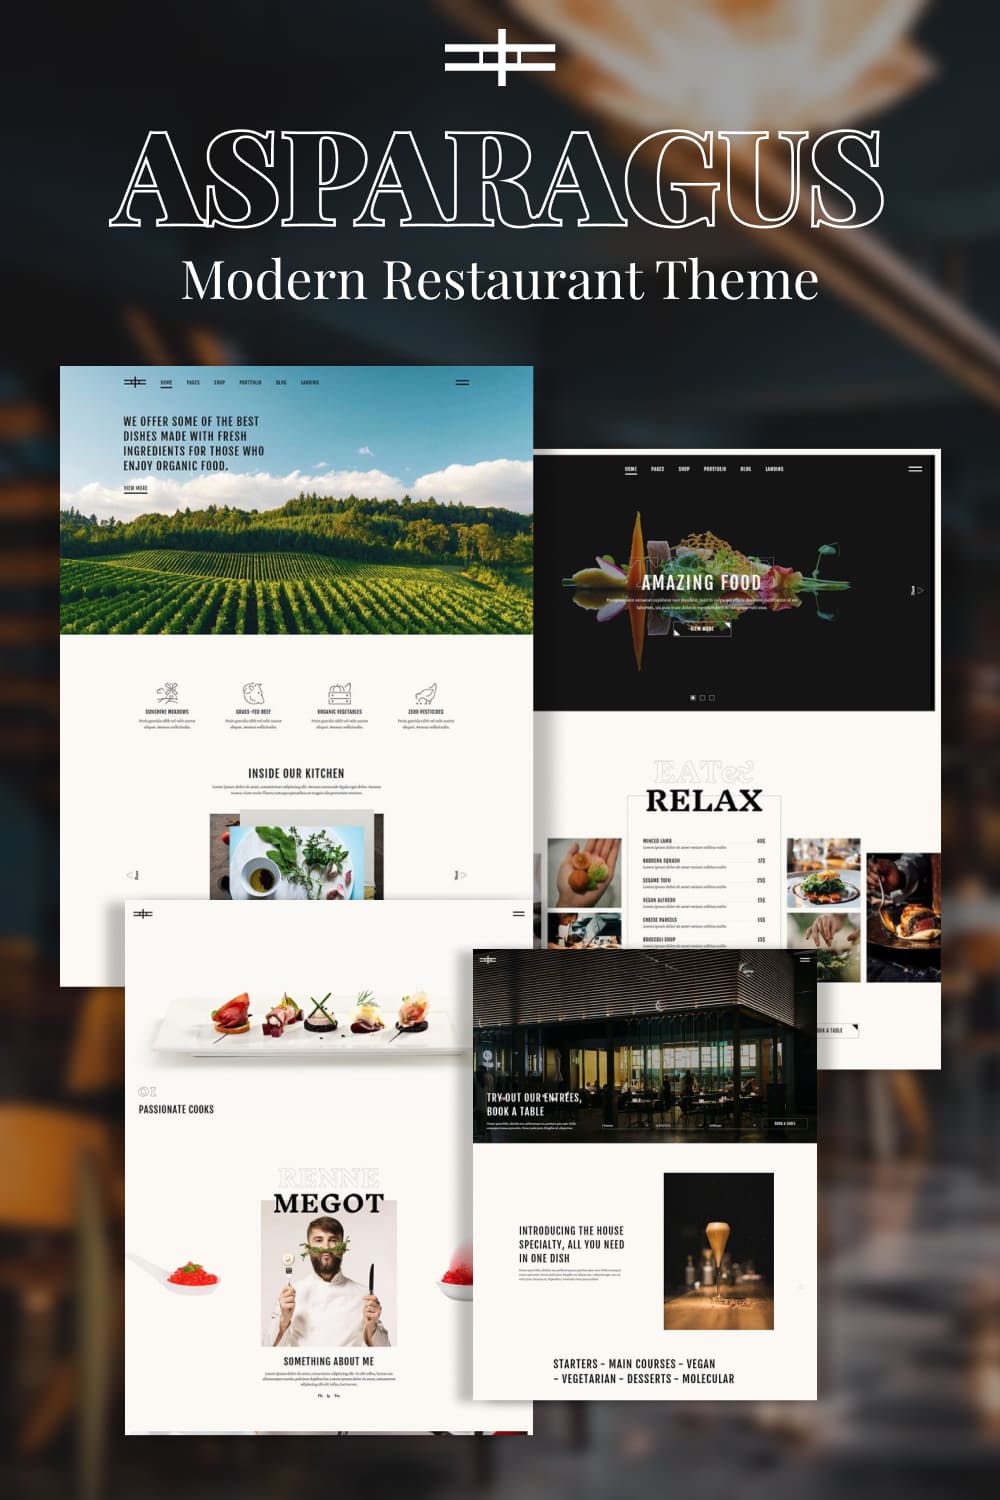 A collection of beautiful pages of the restaurant theme wordpress template.